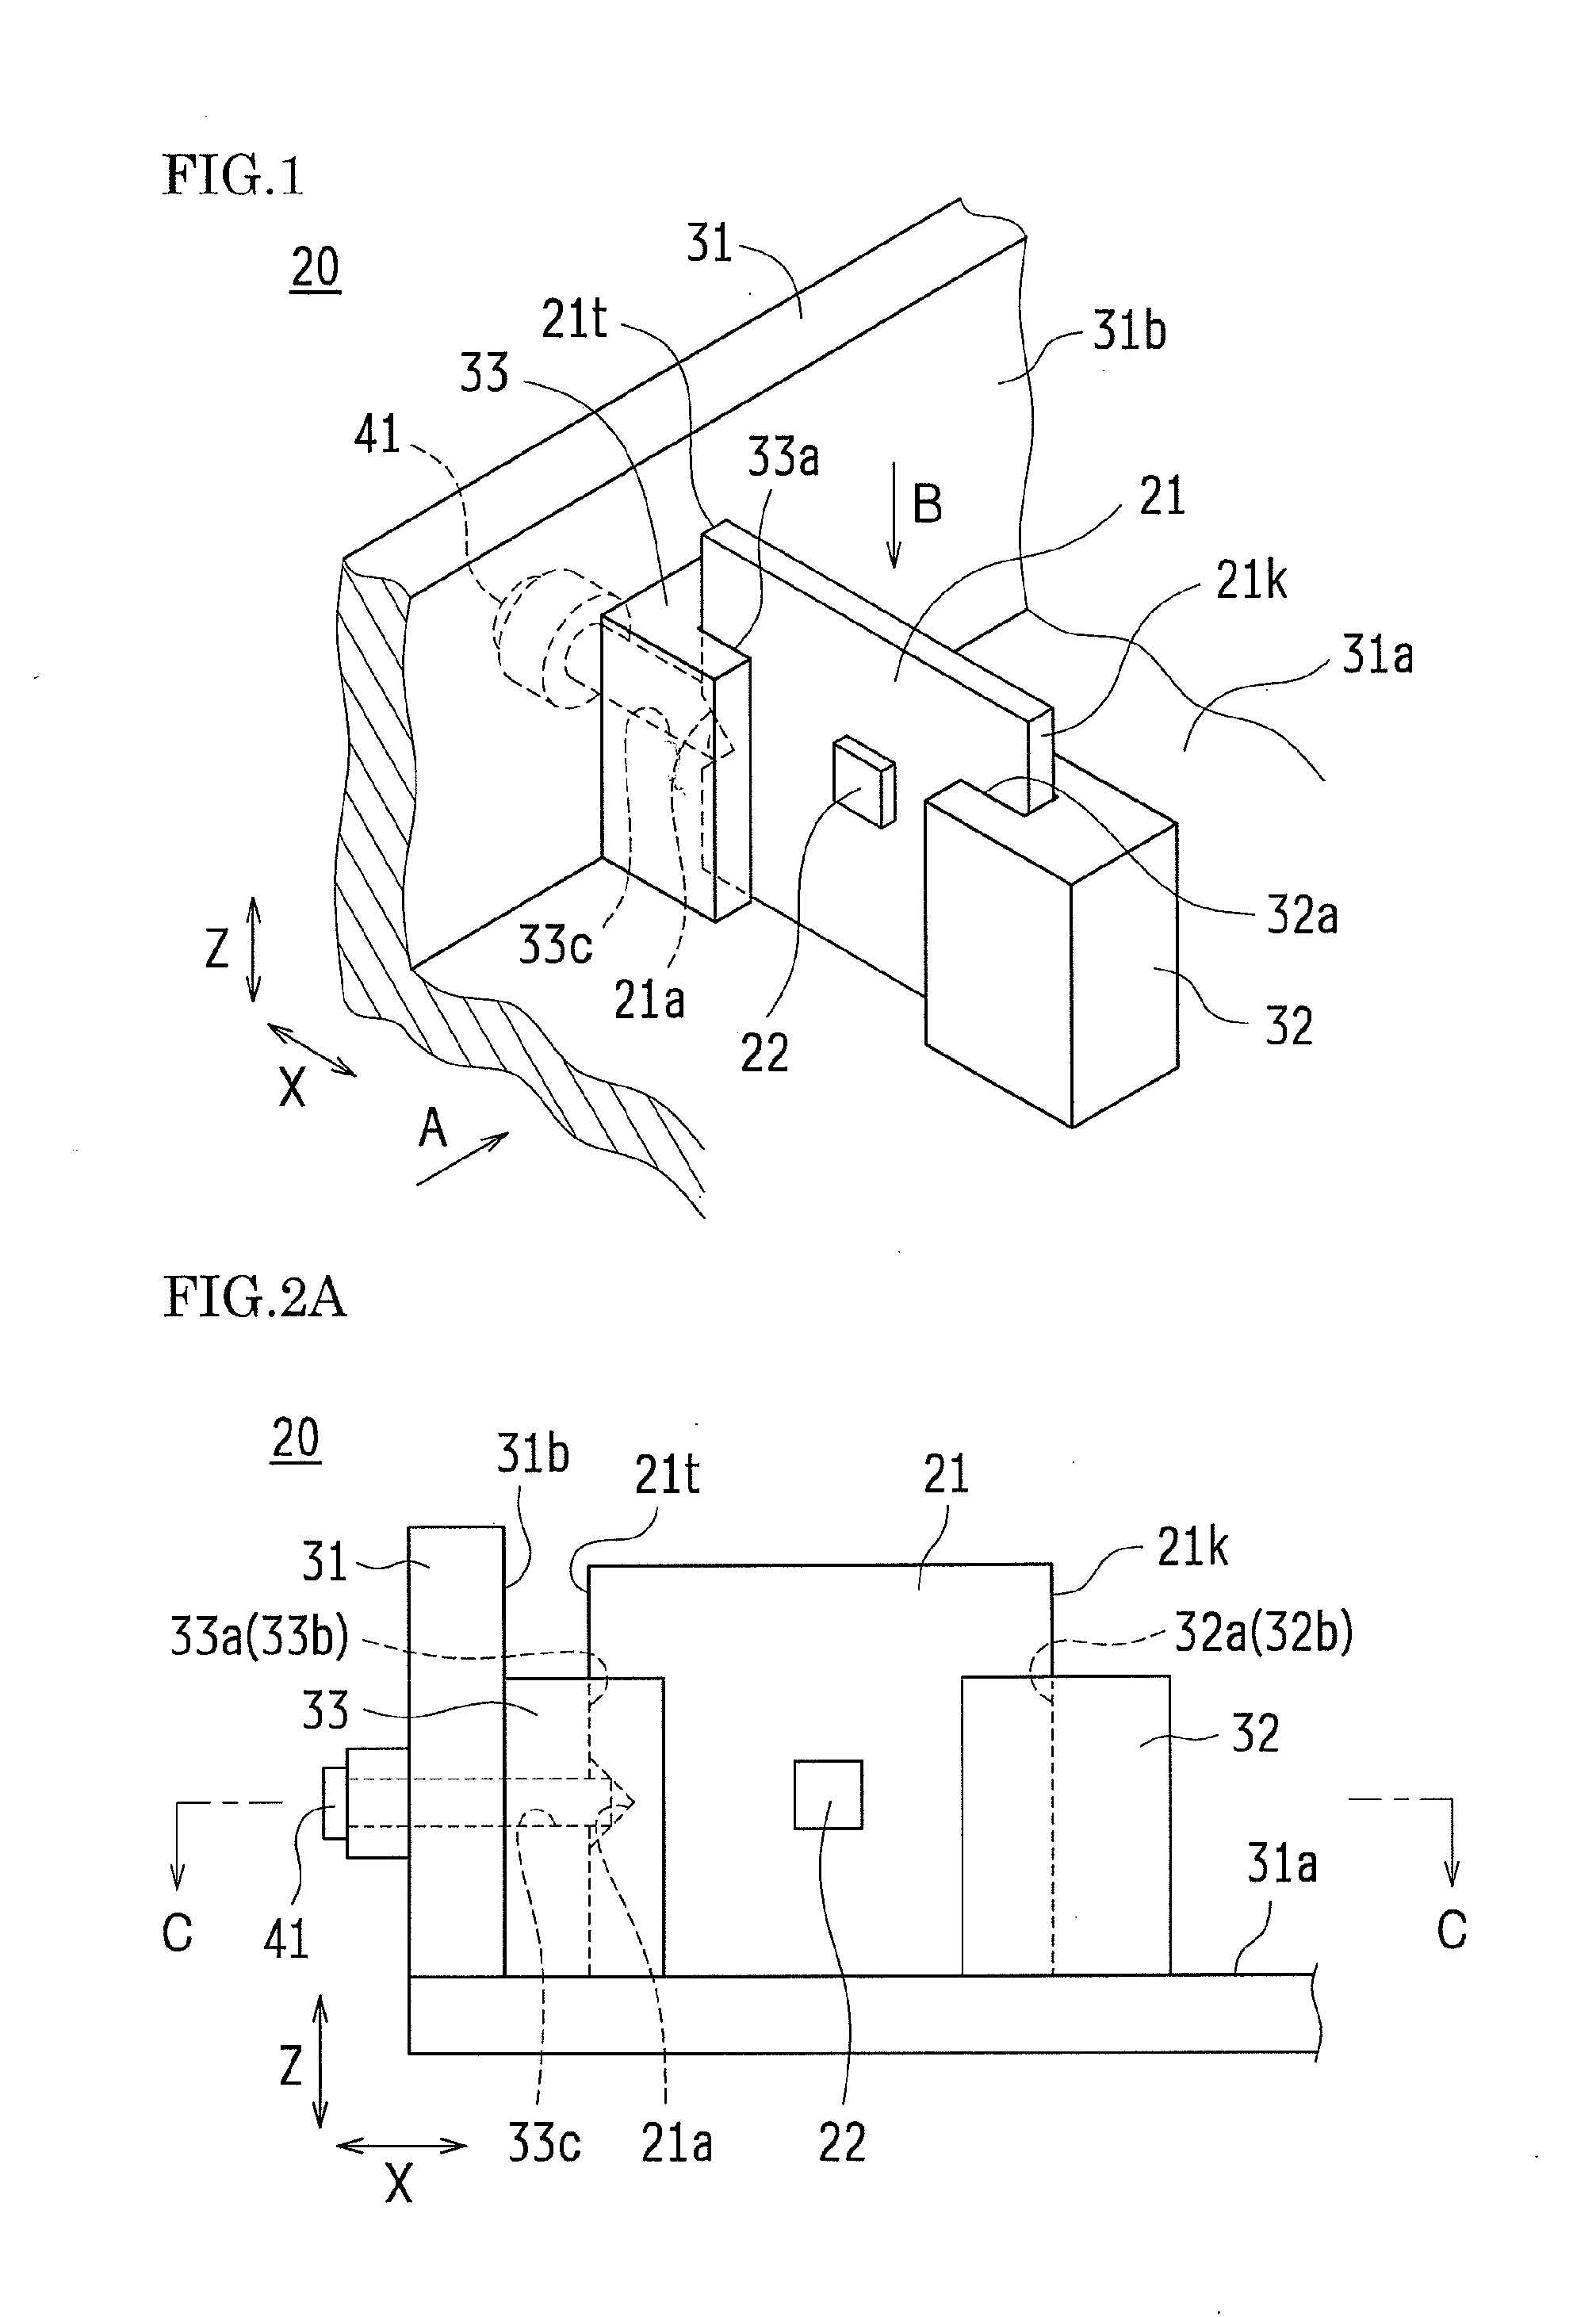 Substrate fastening structure, optical scanning device, and image forming apparatus